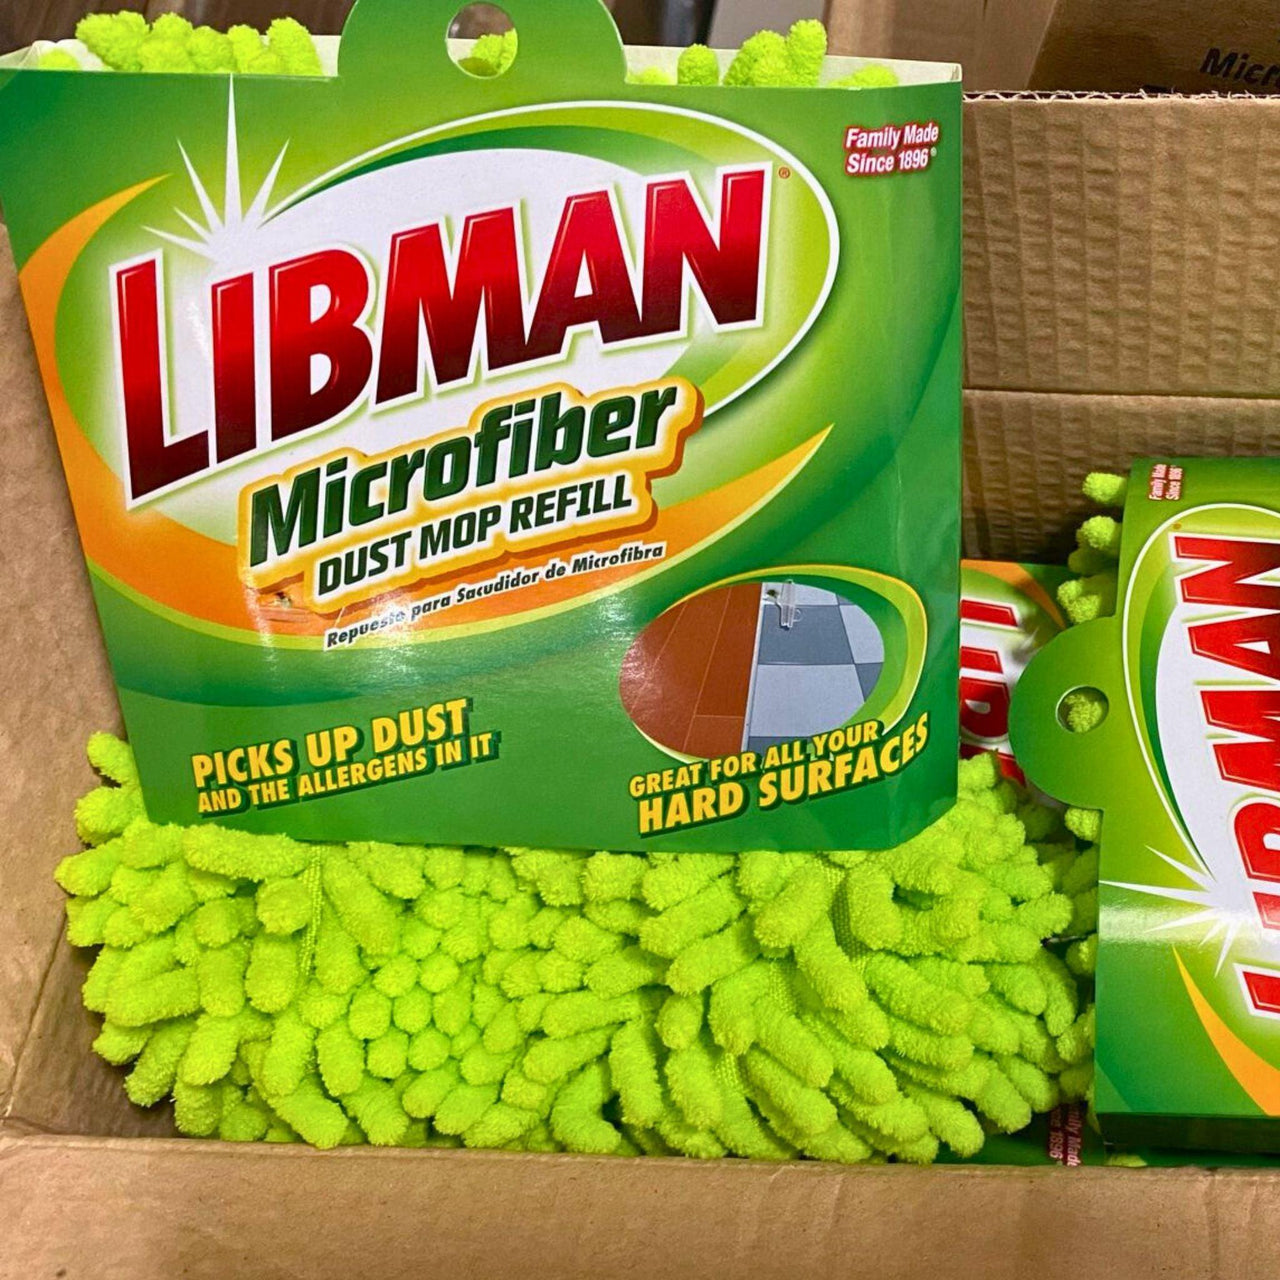 Libman Microfiber Dust Mop Refill Picks Up Dust Great for all your Hard Surfaces (50 Pcs Lot) - Discount Wholesalers Inc